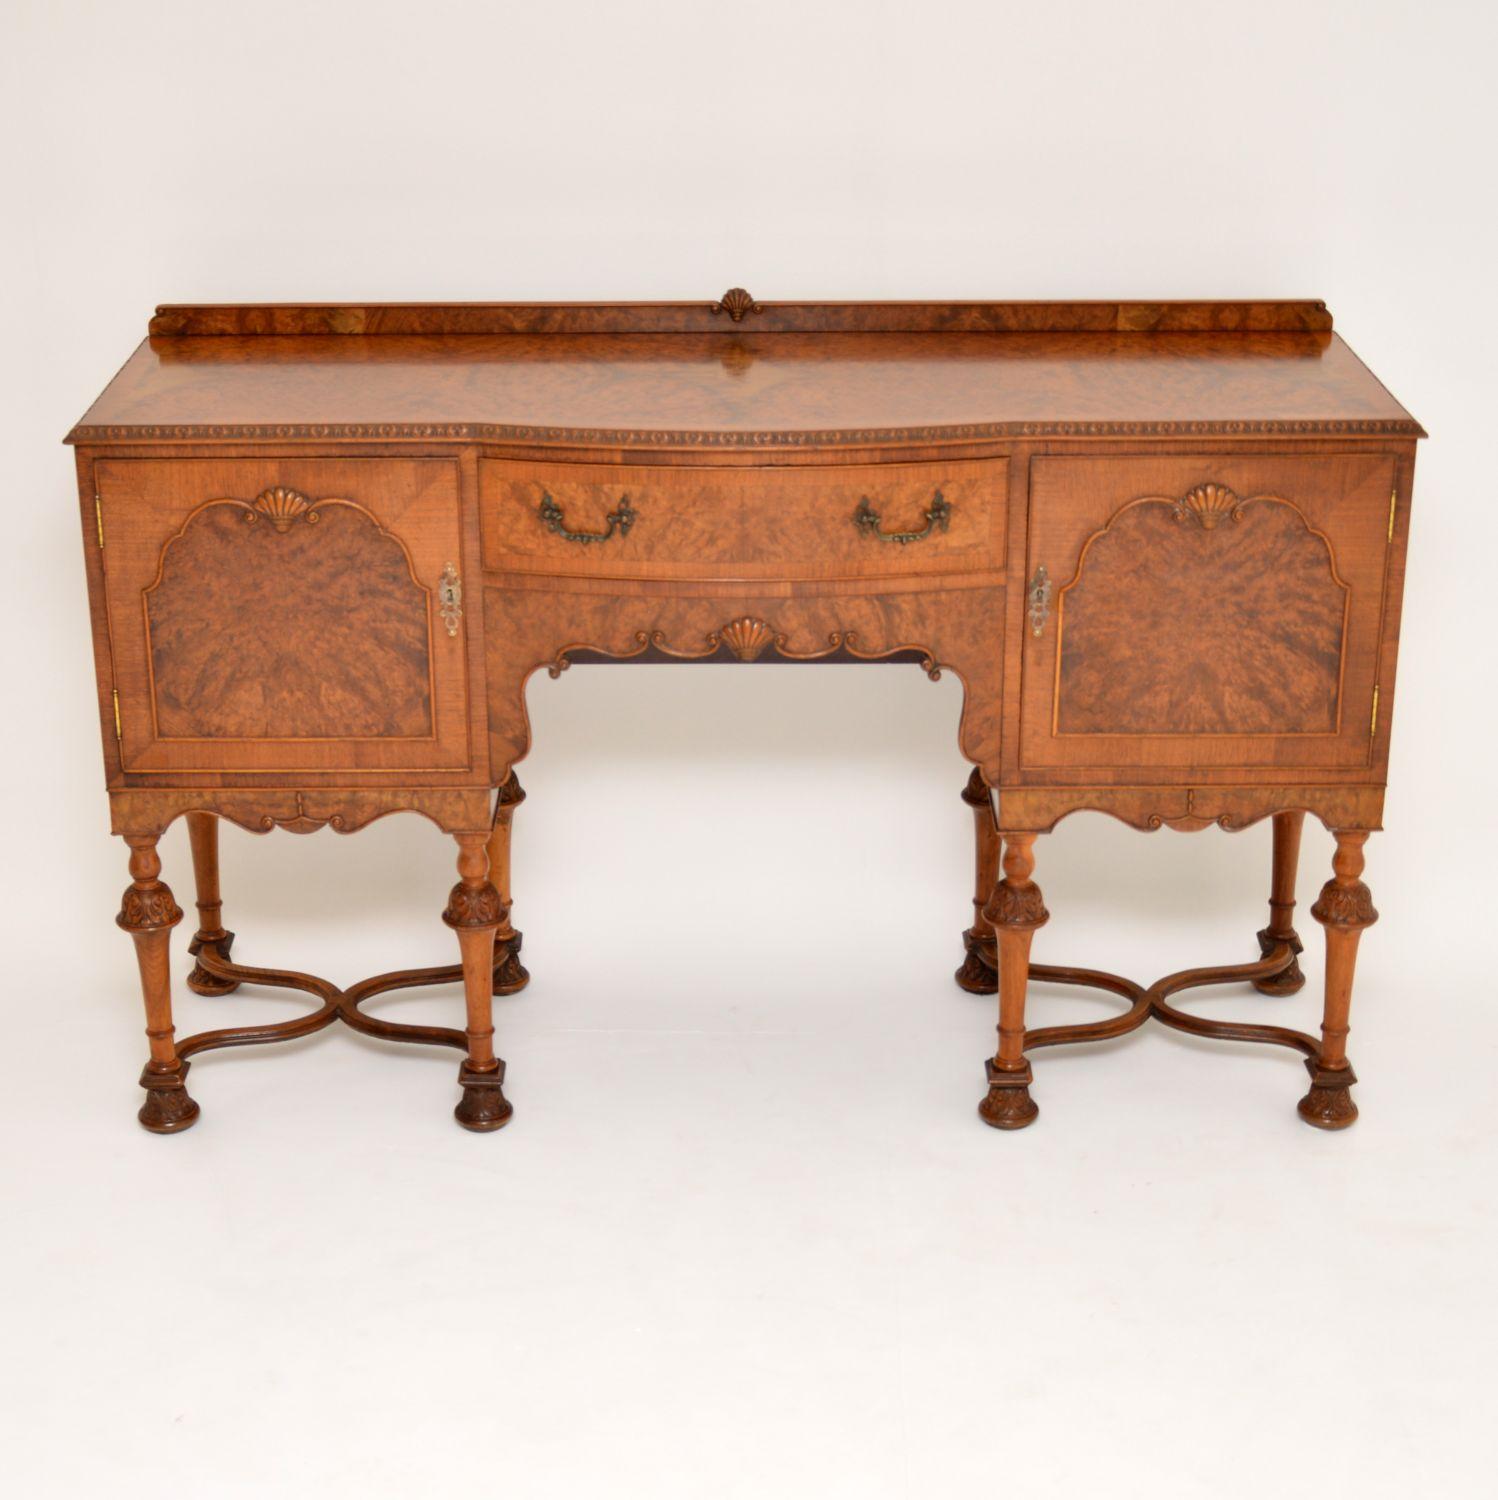 Antique William & Mary style walnut sideboard of incredible quality and dating to circa 1930s period. It has a burr walnut top with a crossbanded edge and fine carving all around. There are two burr walnut panelled cupboards with shell carvings on